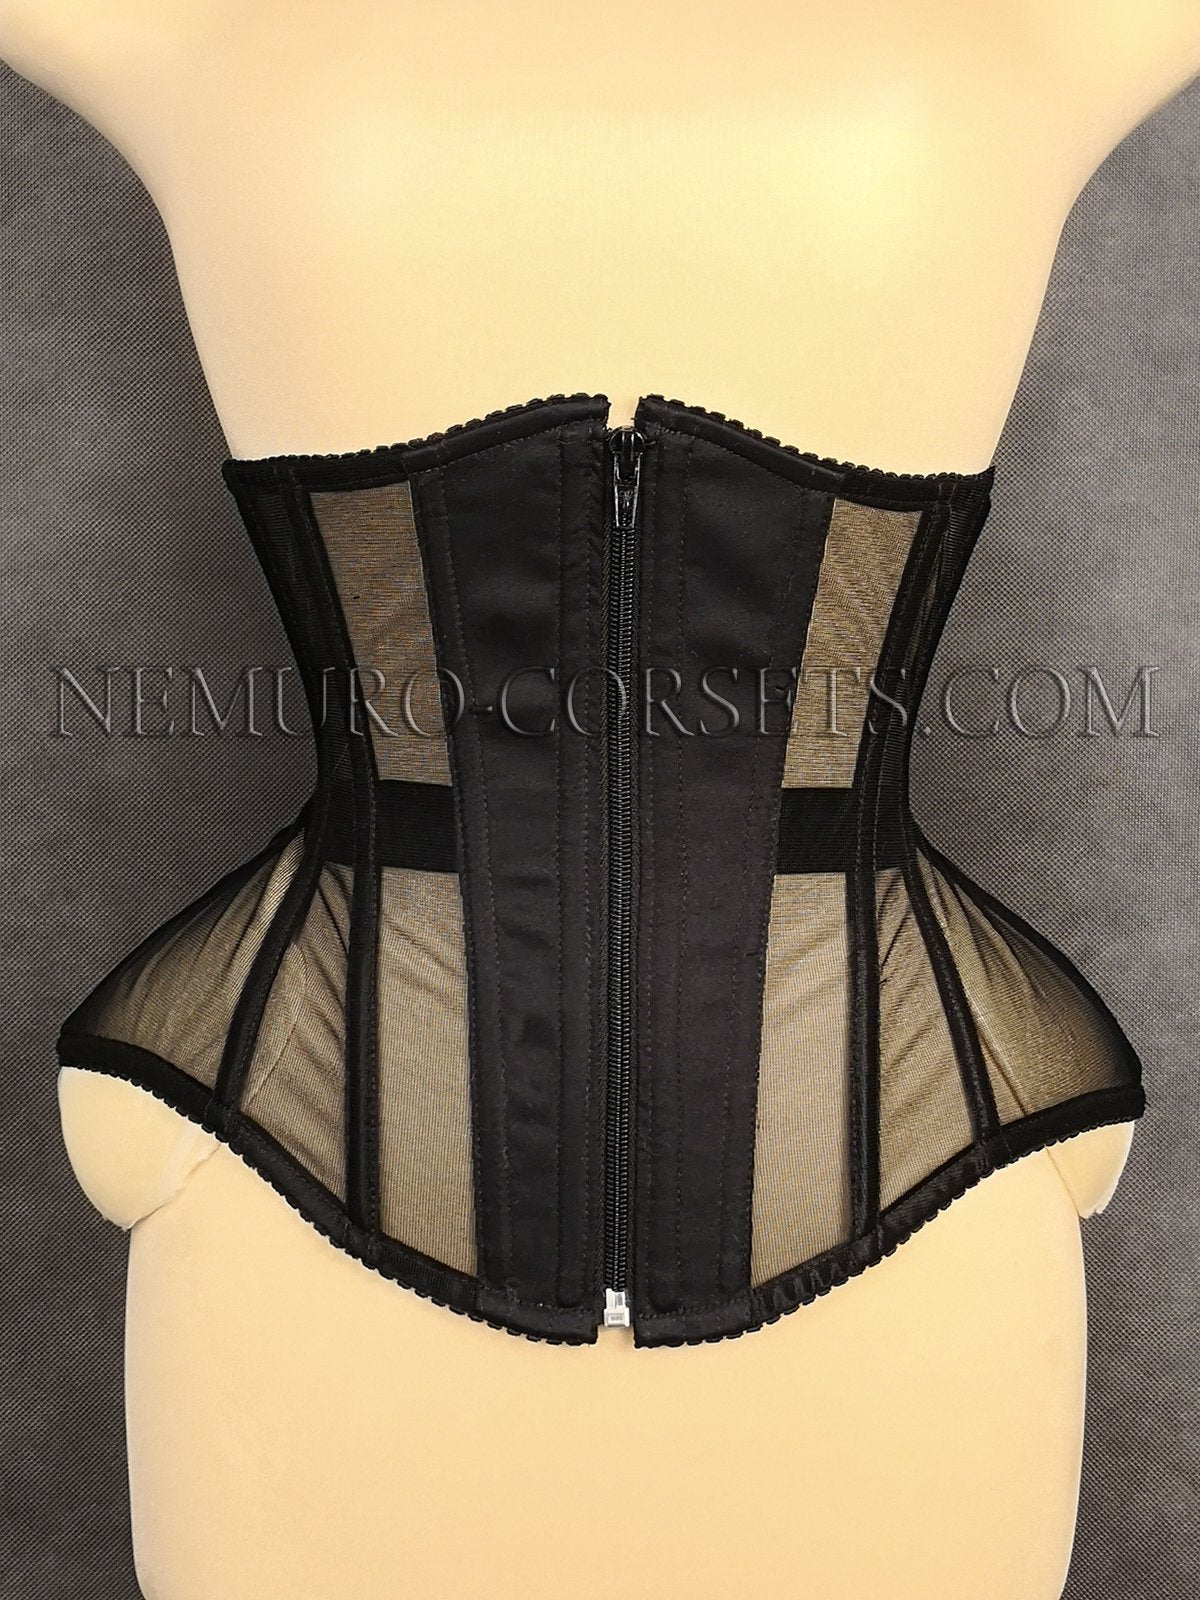 Waist Training Comfy and Cool Mesh Corsets for Sale